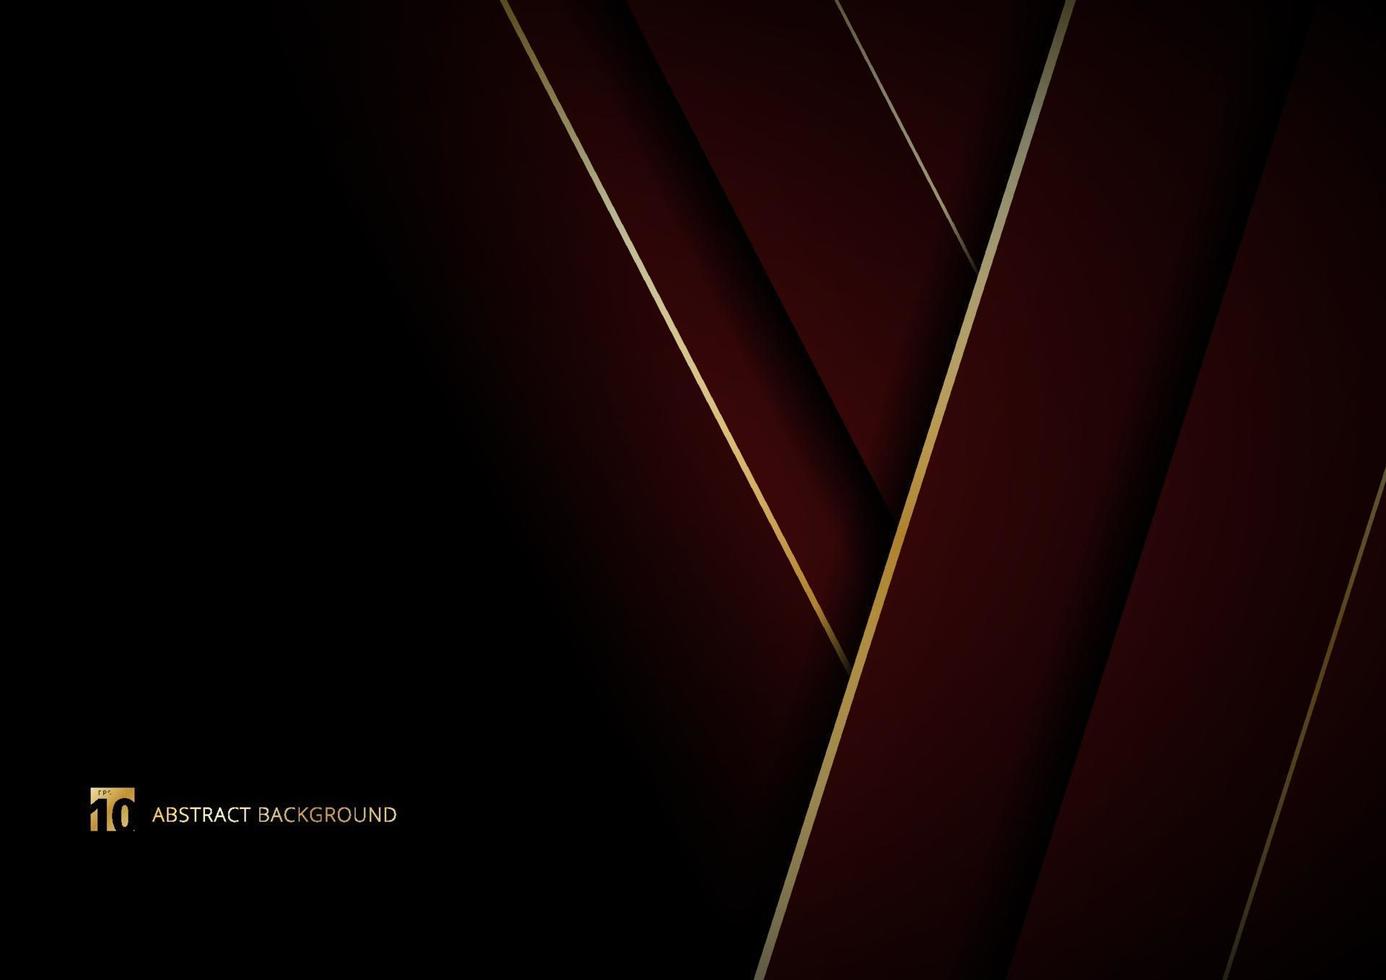 Abstract template red geometric diagonal with golden border on black background space for your text. vector